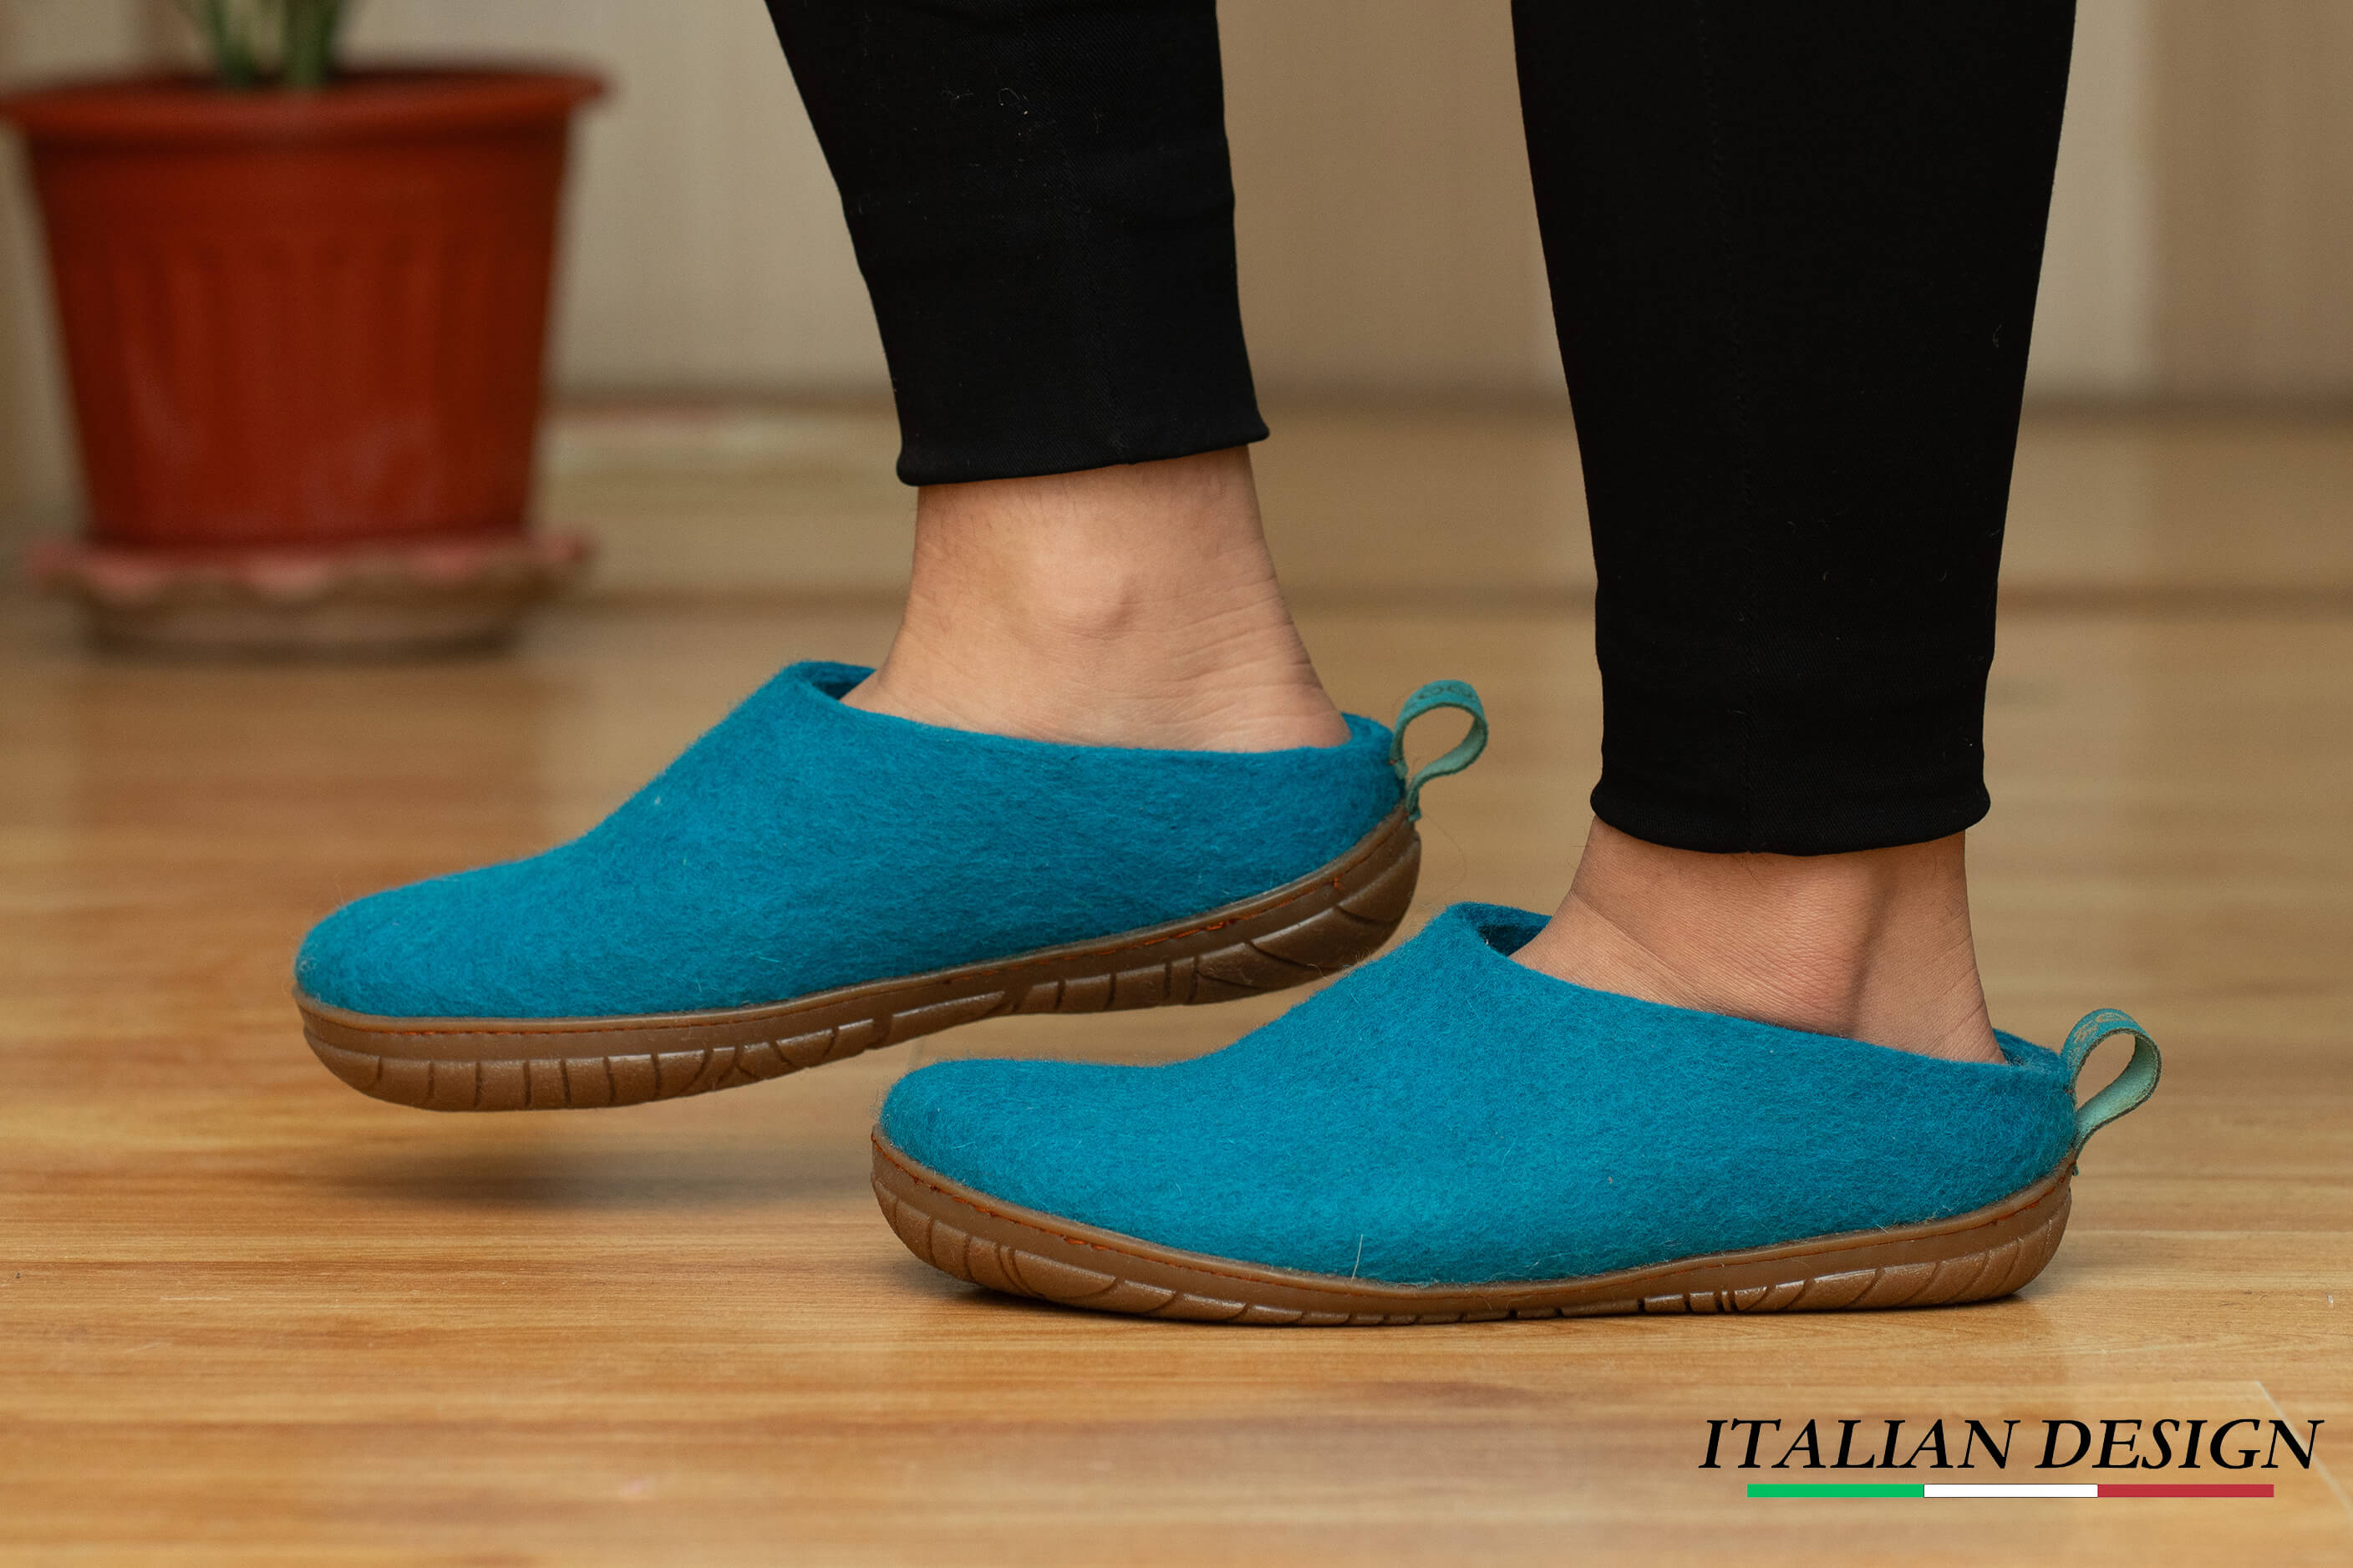 Outdoor Open Heel Slippers With Rubber Sole - Turquoise